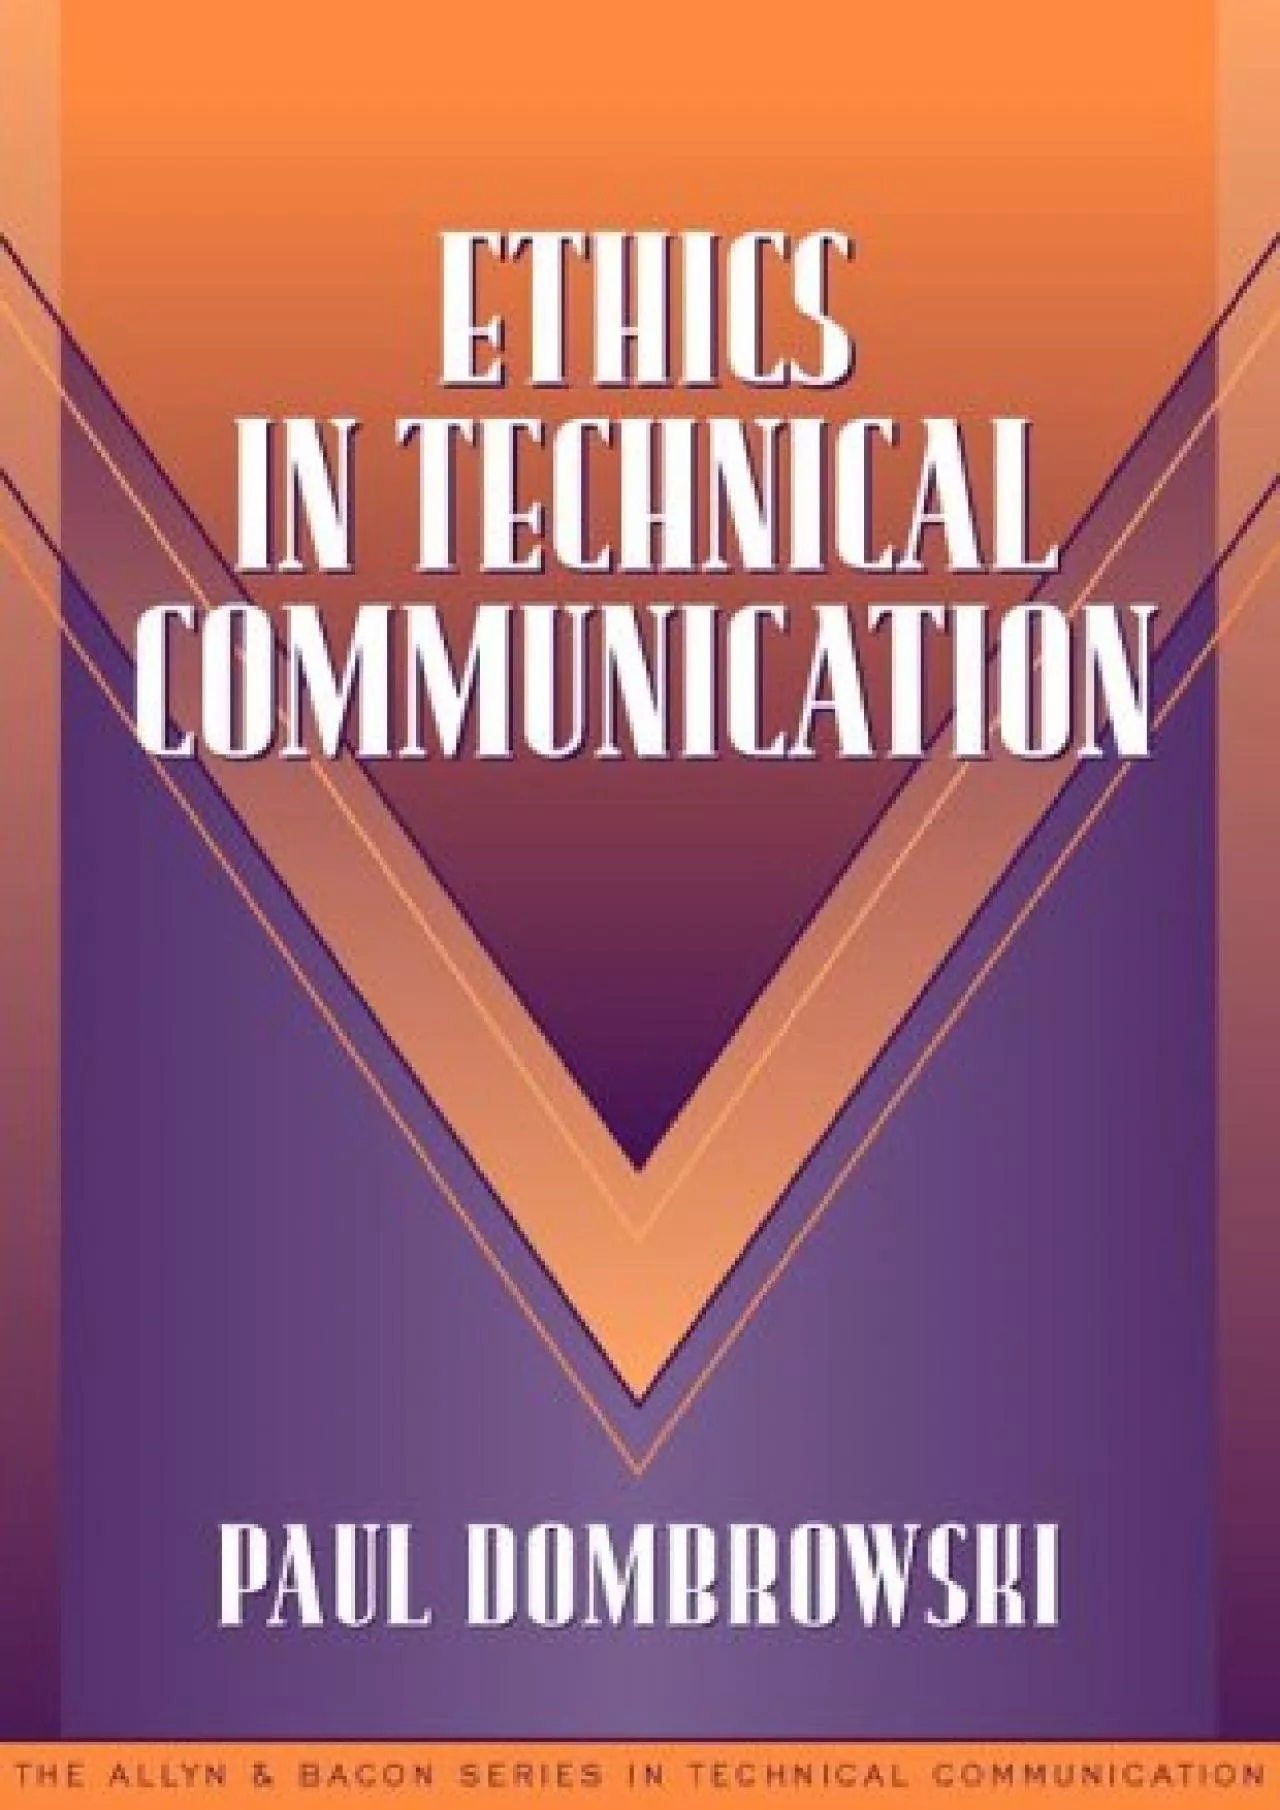 (BOOK)-Ethics in Technical Communication (Part of the Allyn & Bacon Series in Technical